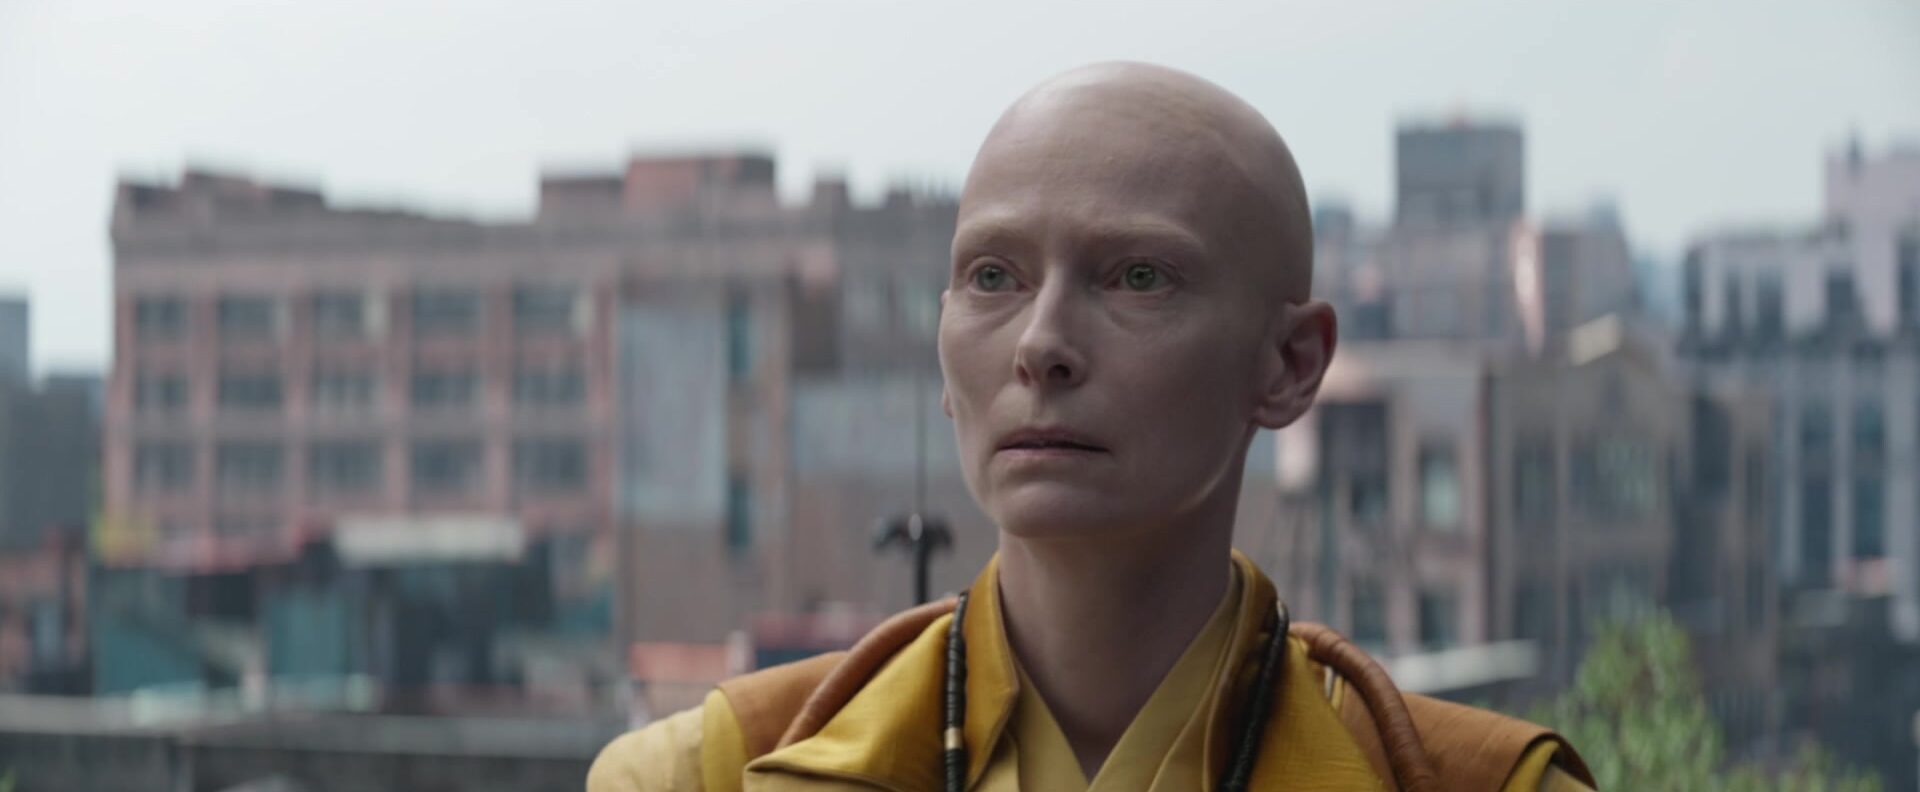 The Ancient One (Tilda Swinton) realizes her role in preserving the future in Avengers: Endgame (2019), Marvel Entertainment